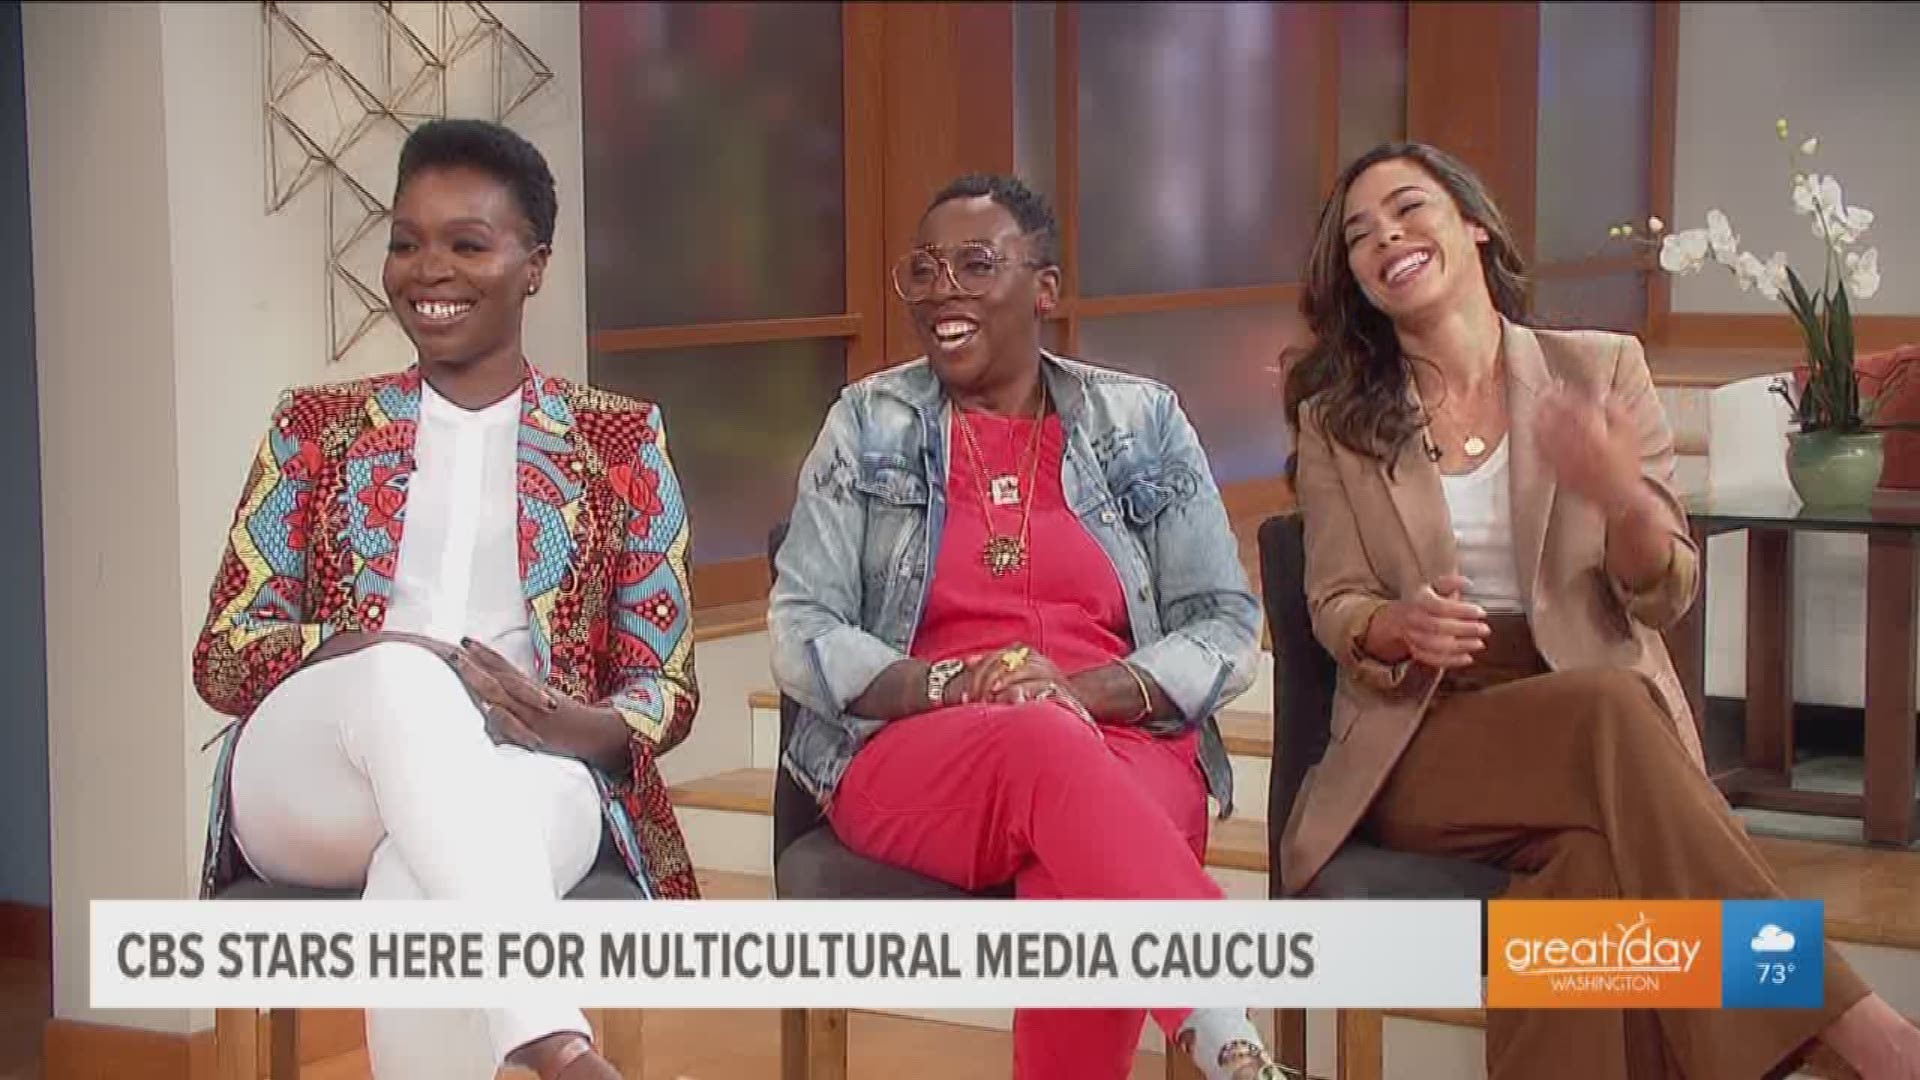 CBS will be premiering two new highly anticipated shows this fall. The stars of the new comedy, Bob ♥ Abishola— Folake Olowofoyeku and Gina Yashere join us with Jessica Camacho, who is featured in the new drama, All Rise. Make sure to check out both shows Sept. 23 beginning at 8:30 p.m. with Bob ♥ Abishola followed by All Rise.